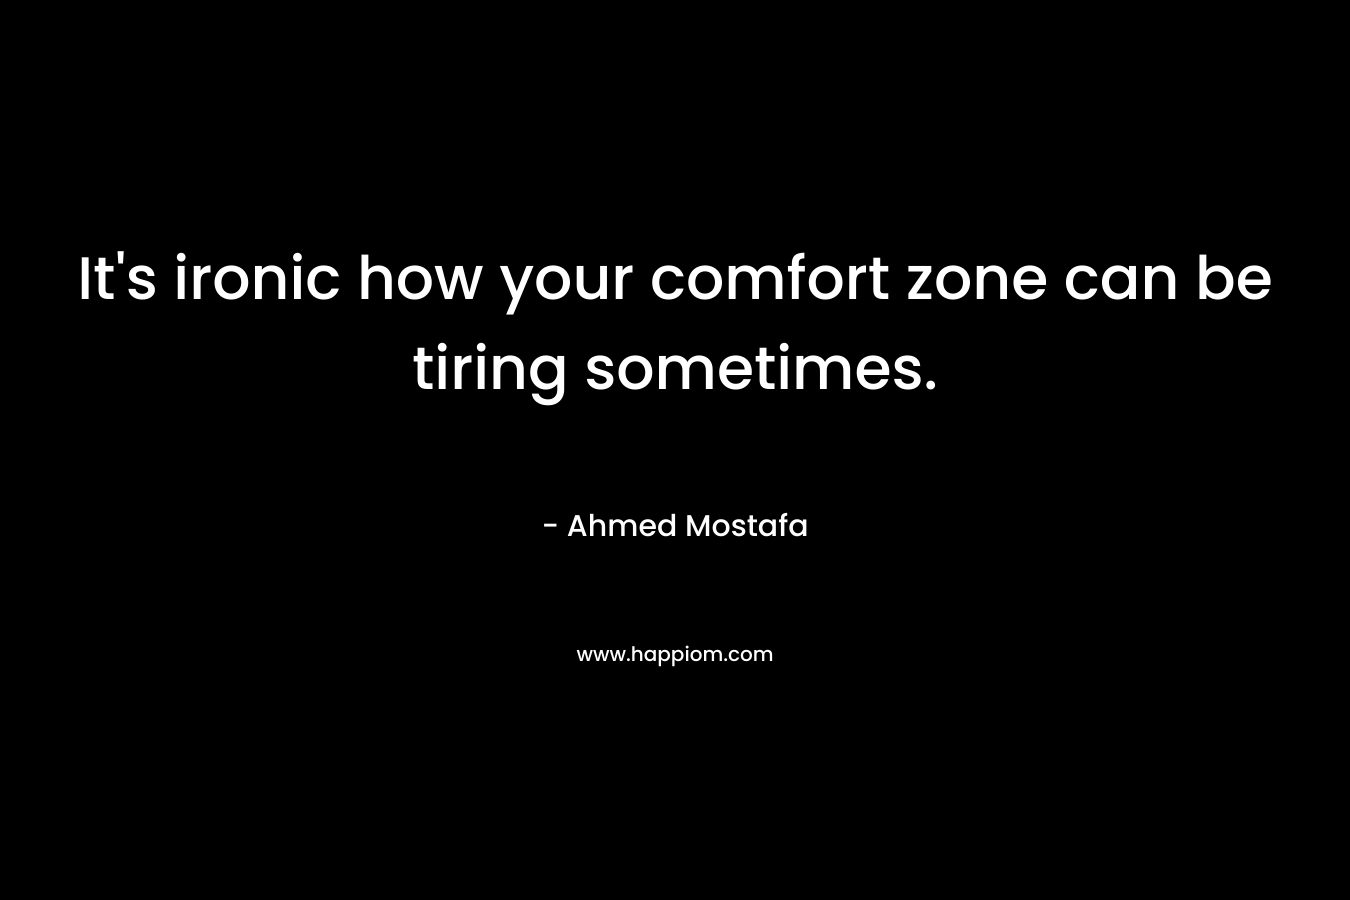 It's ironic how your comfort zone can be tiring sometimes.